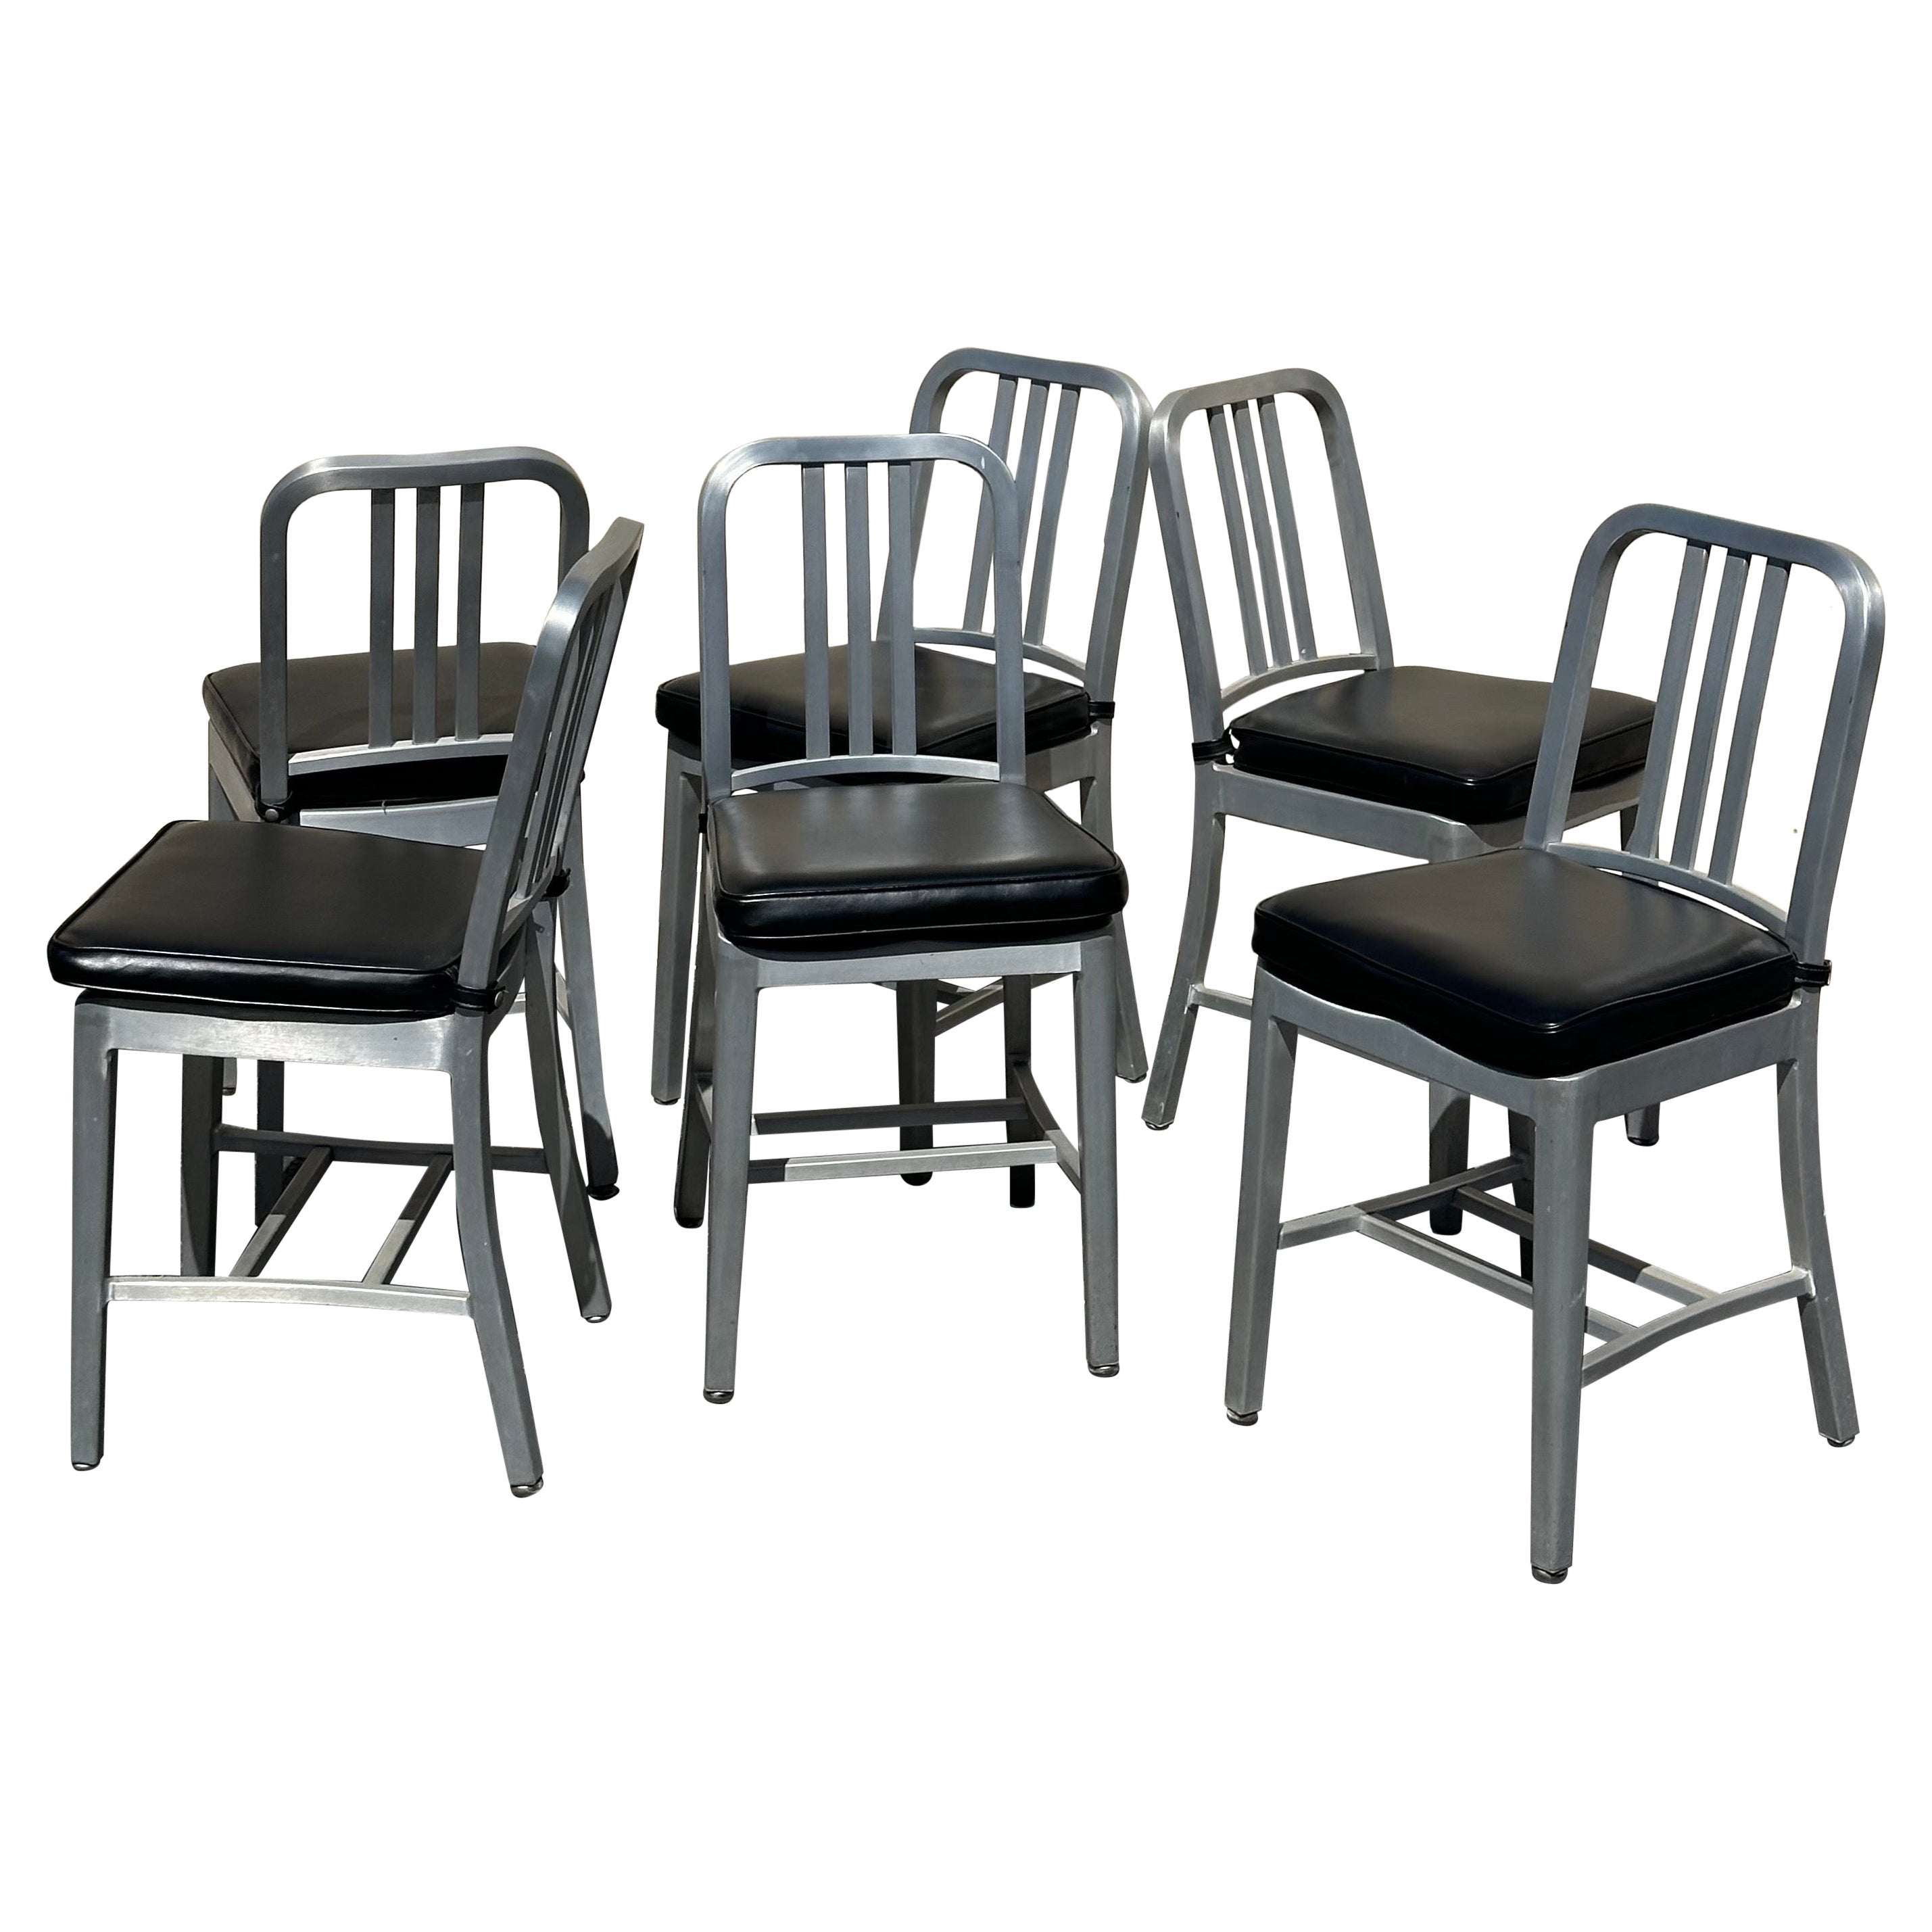 Set of Six Brushed Aluminum #111 "Navy" Chairs  by Emeco with Cushion